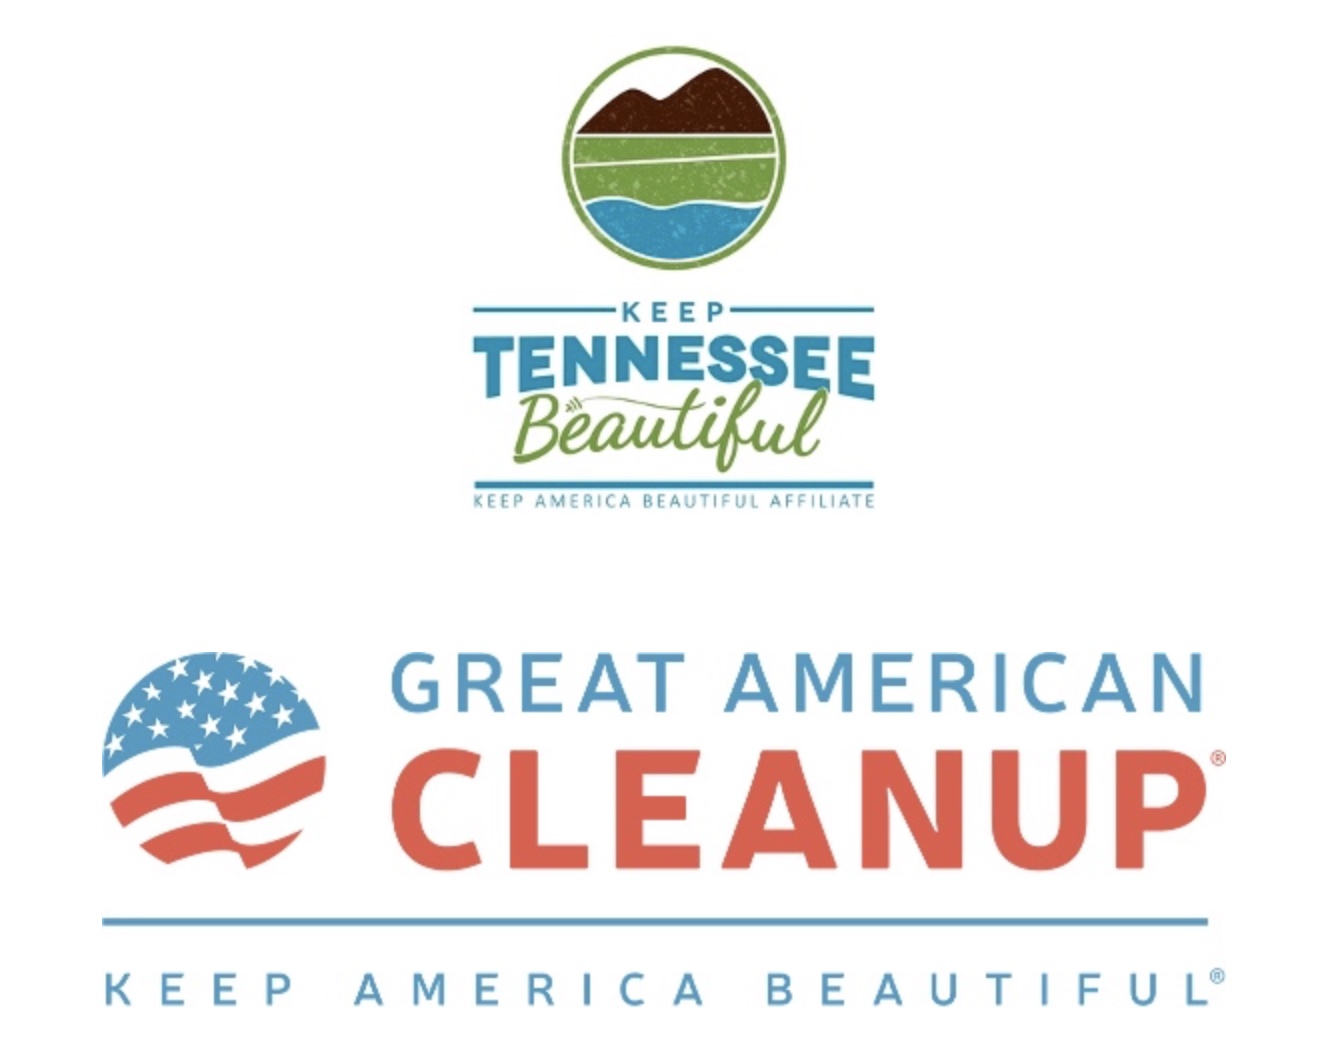 March Traschercise Cleanup in Leiper’s Fork to Celebrate Keep Tennessee Beautiful Month